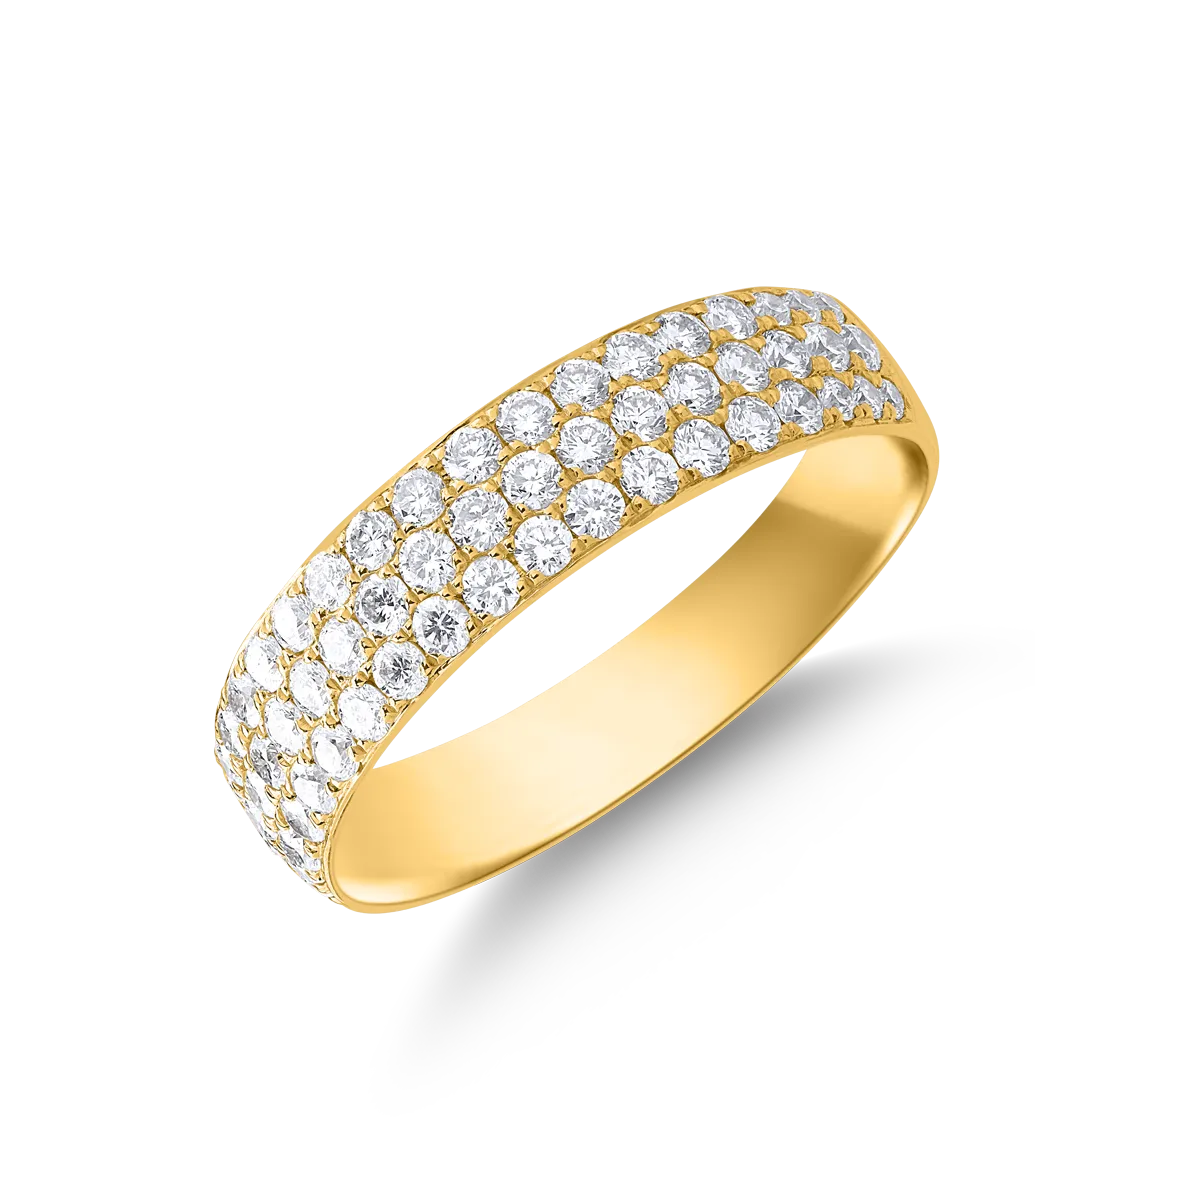 14K yellow gold ring with 0.91ct diamonds